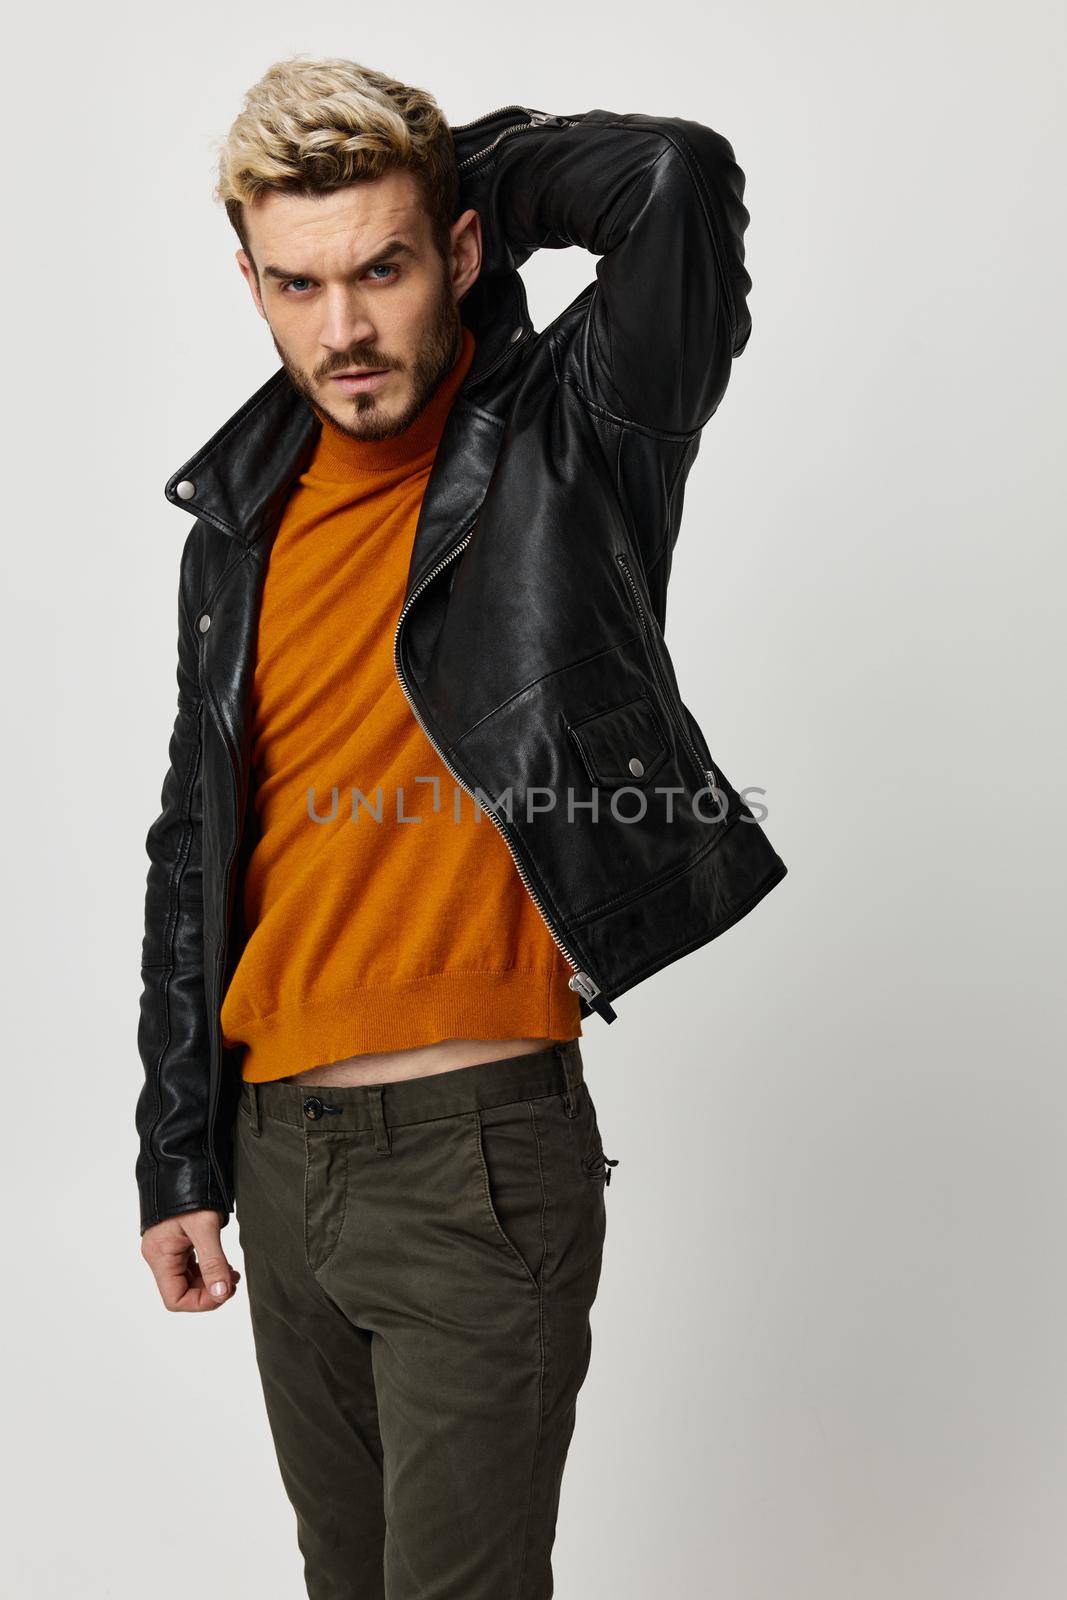 a blond guy in a leather jacket holding his hands behind his head and an orange sweater pants Copy Space. High quality photo